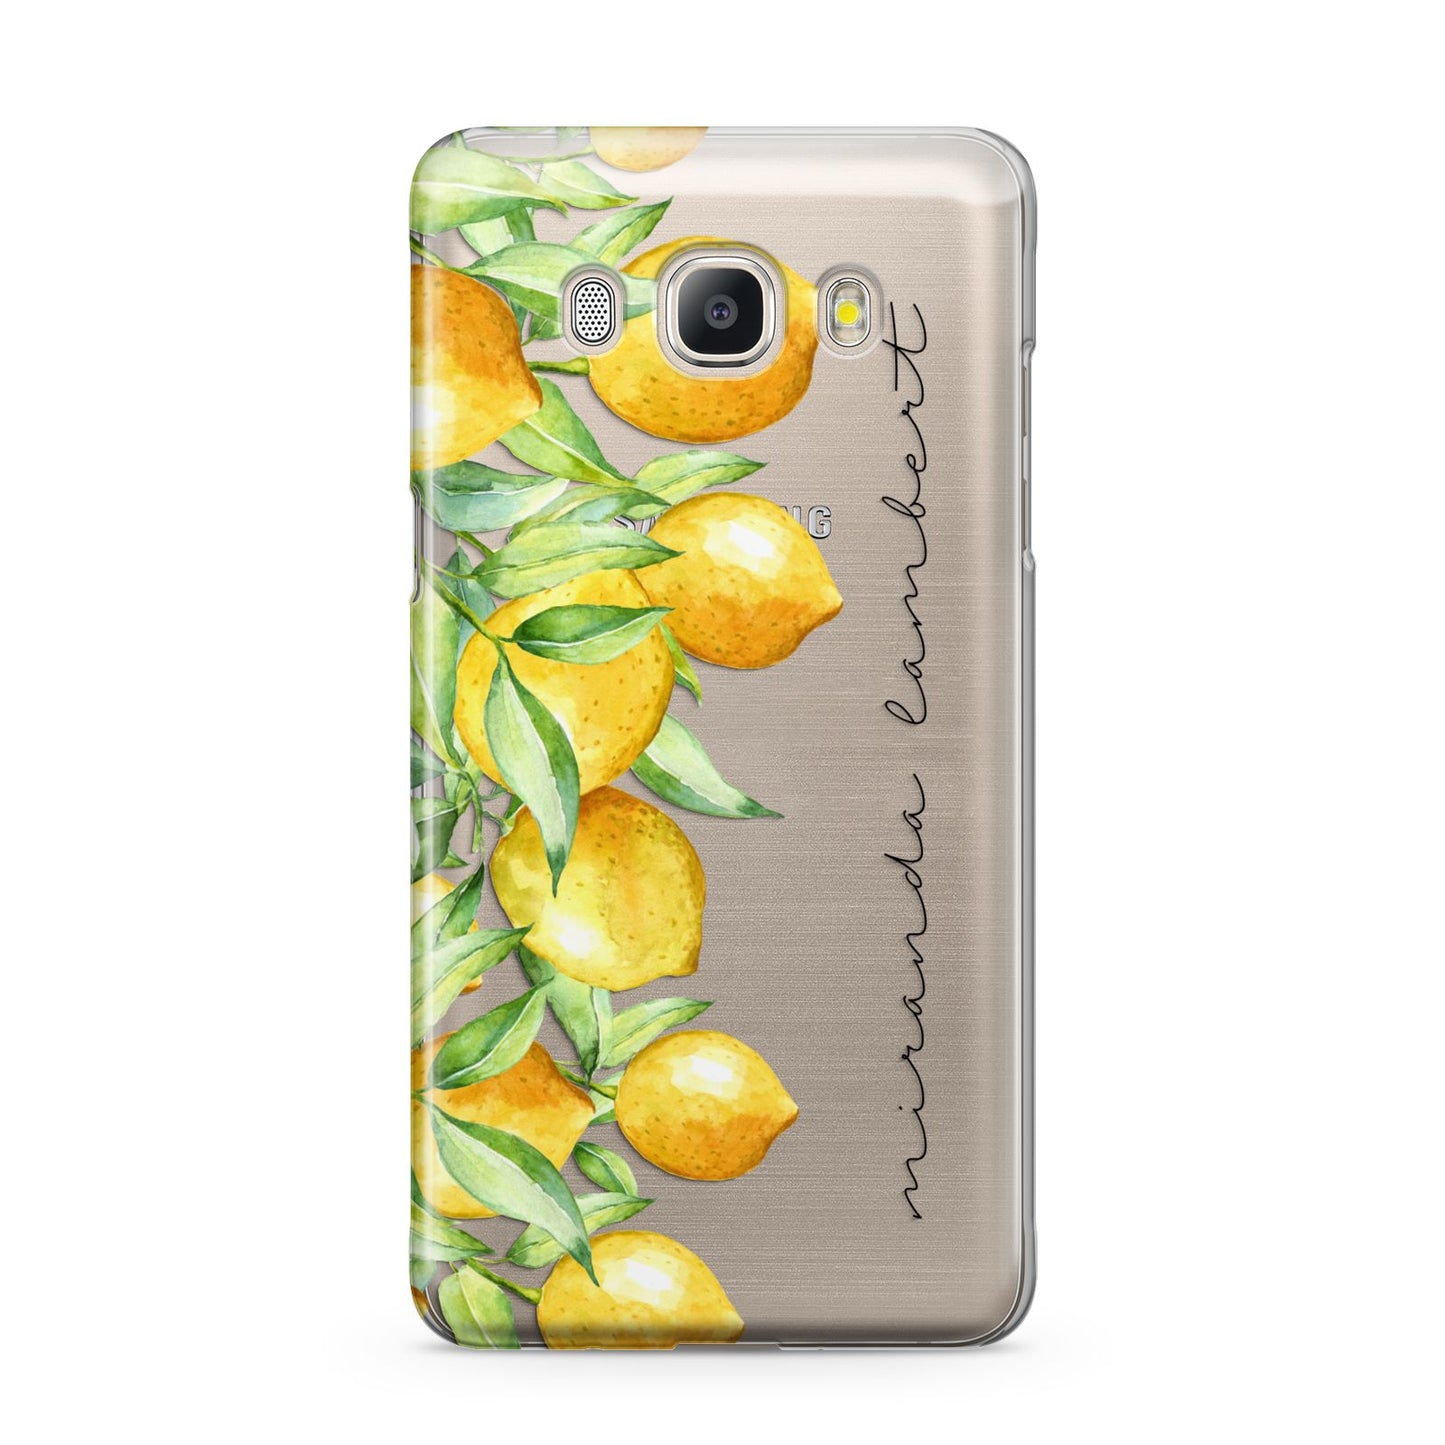 Personalised Lemon Bunches Samsung Galaxy J5 2016 Case